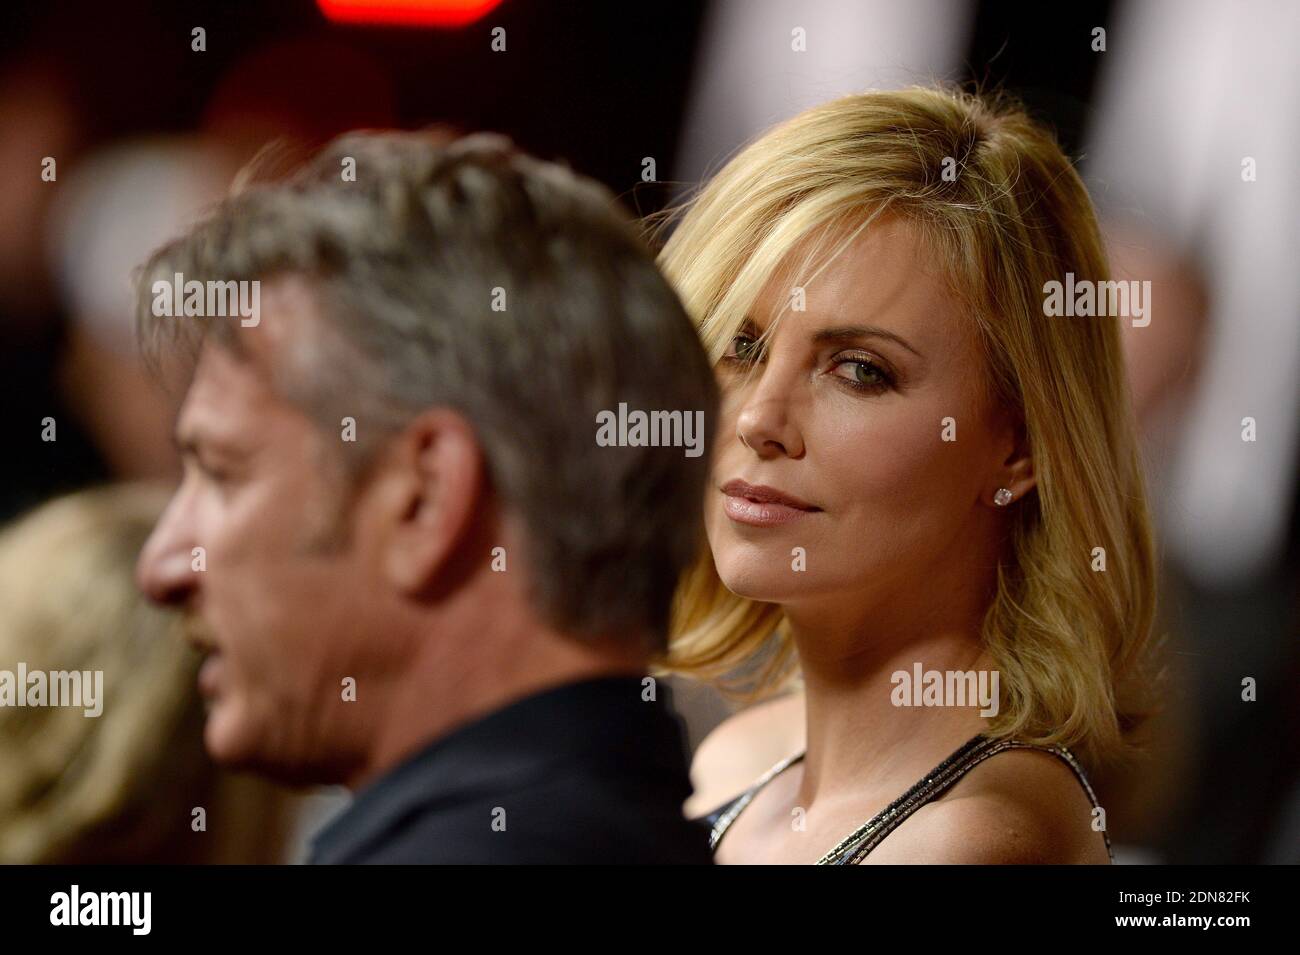 Sean Penn and Charlize Theron attend The Gunman premiere on March 12, 2015 in Los Angeles, CA, USA. Photo by Lionel Hahn/ABACAPRESS.COM Stock Photo